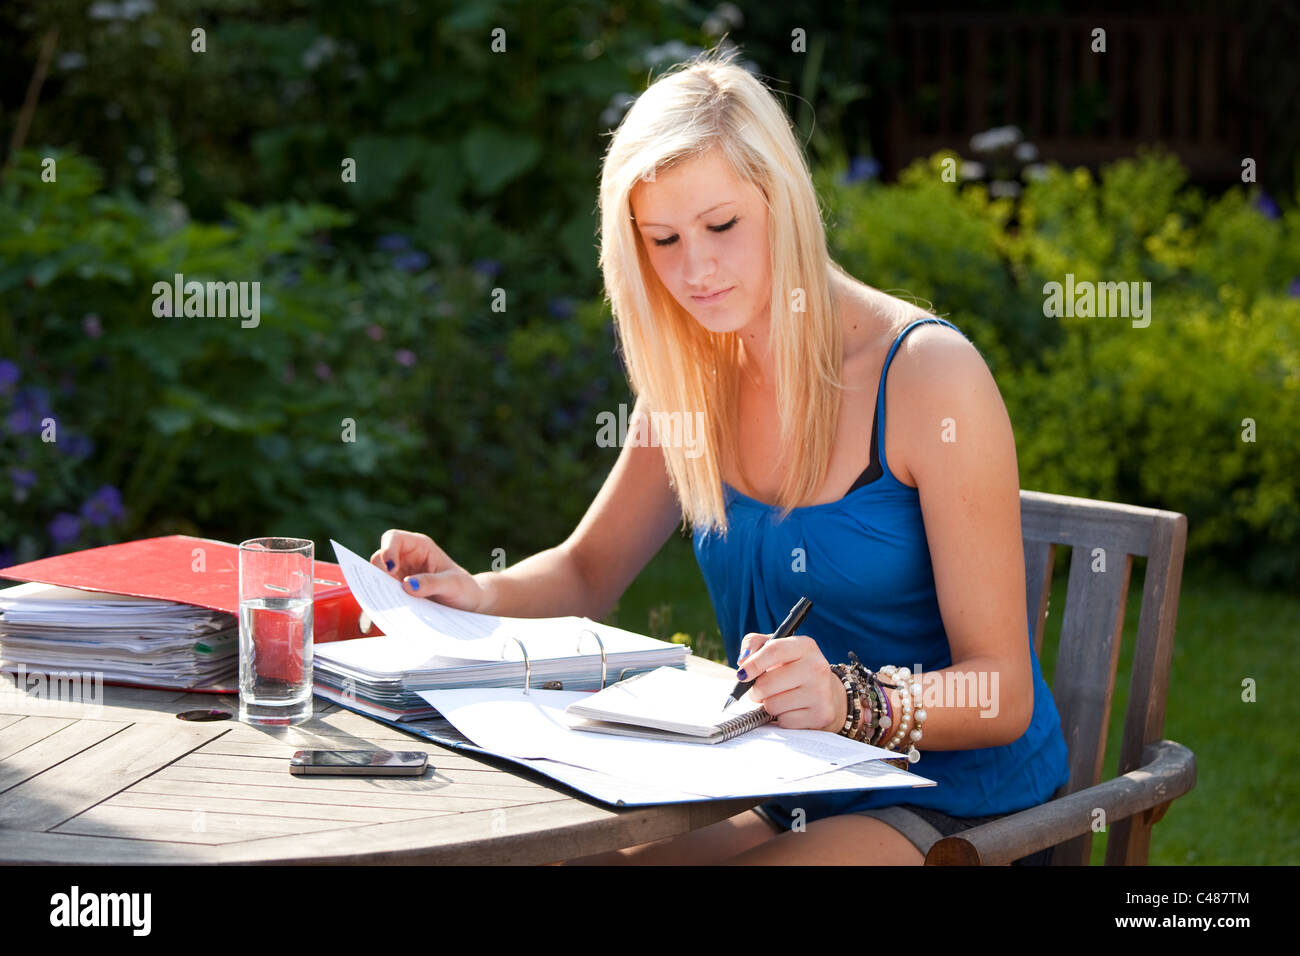 young girl student working and revising for exams in the garden Stock Photo